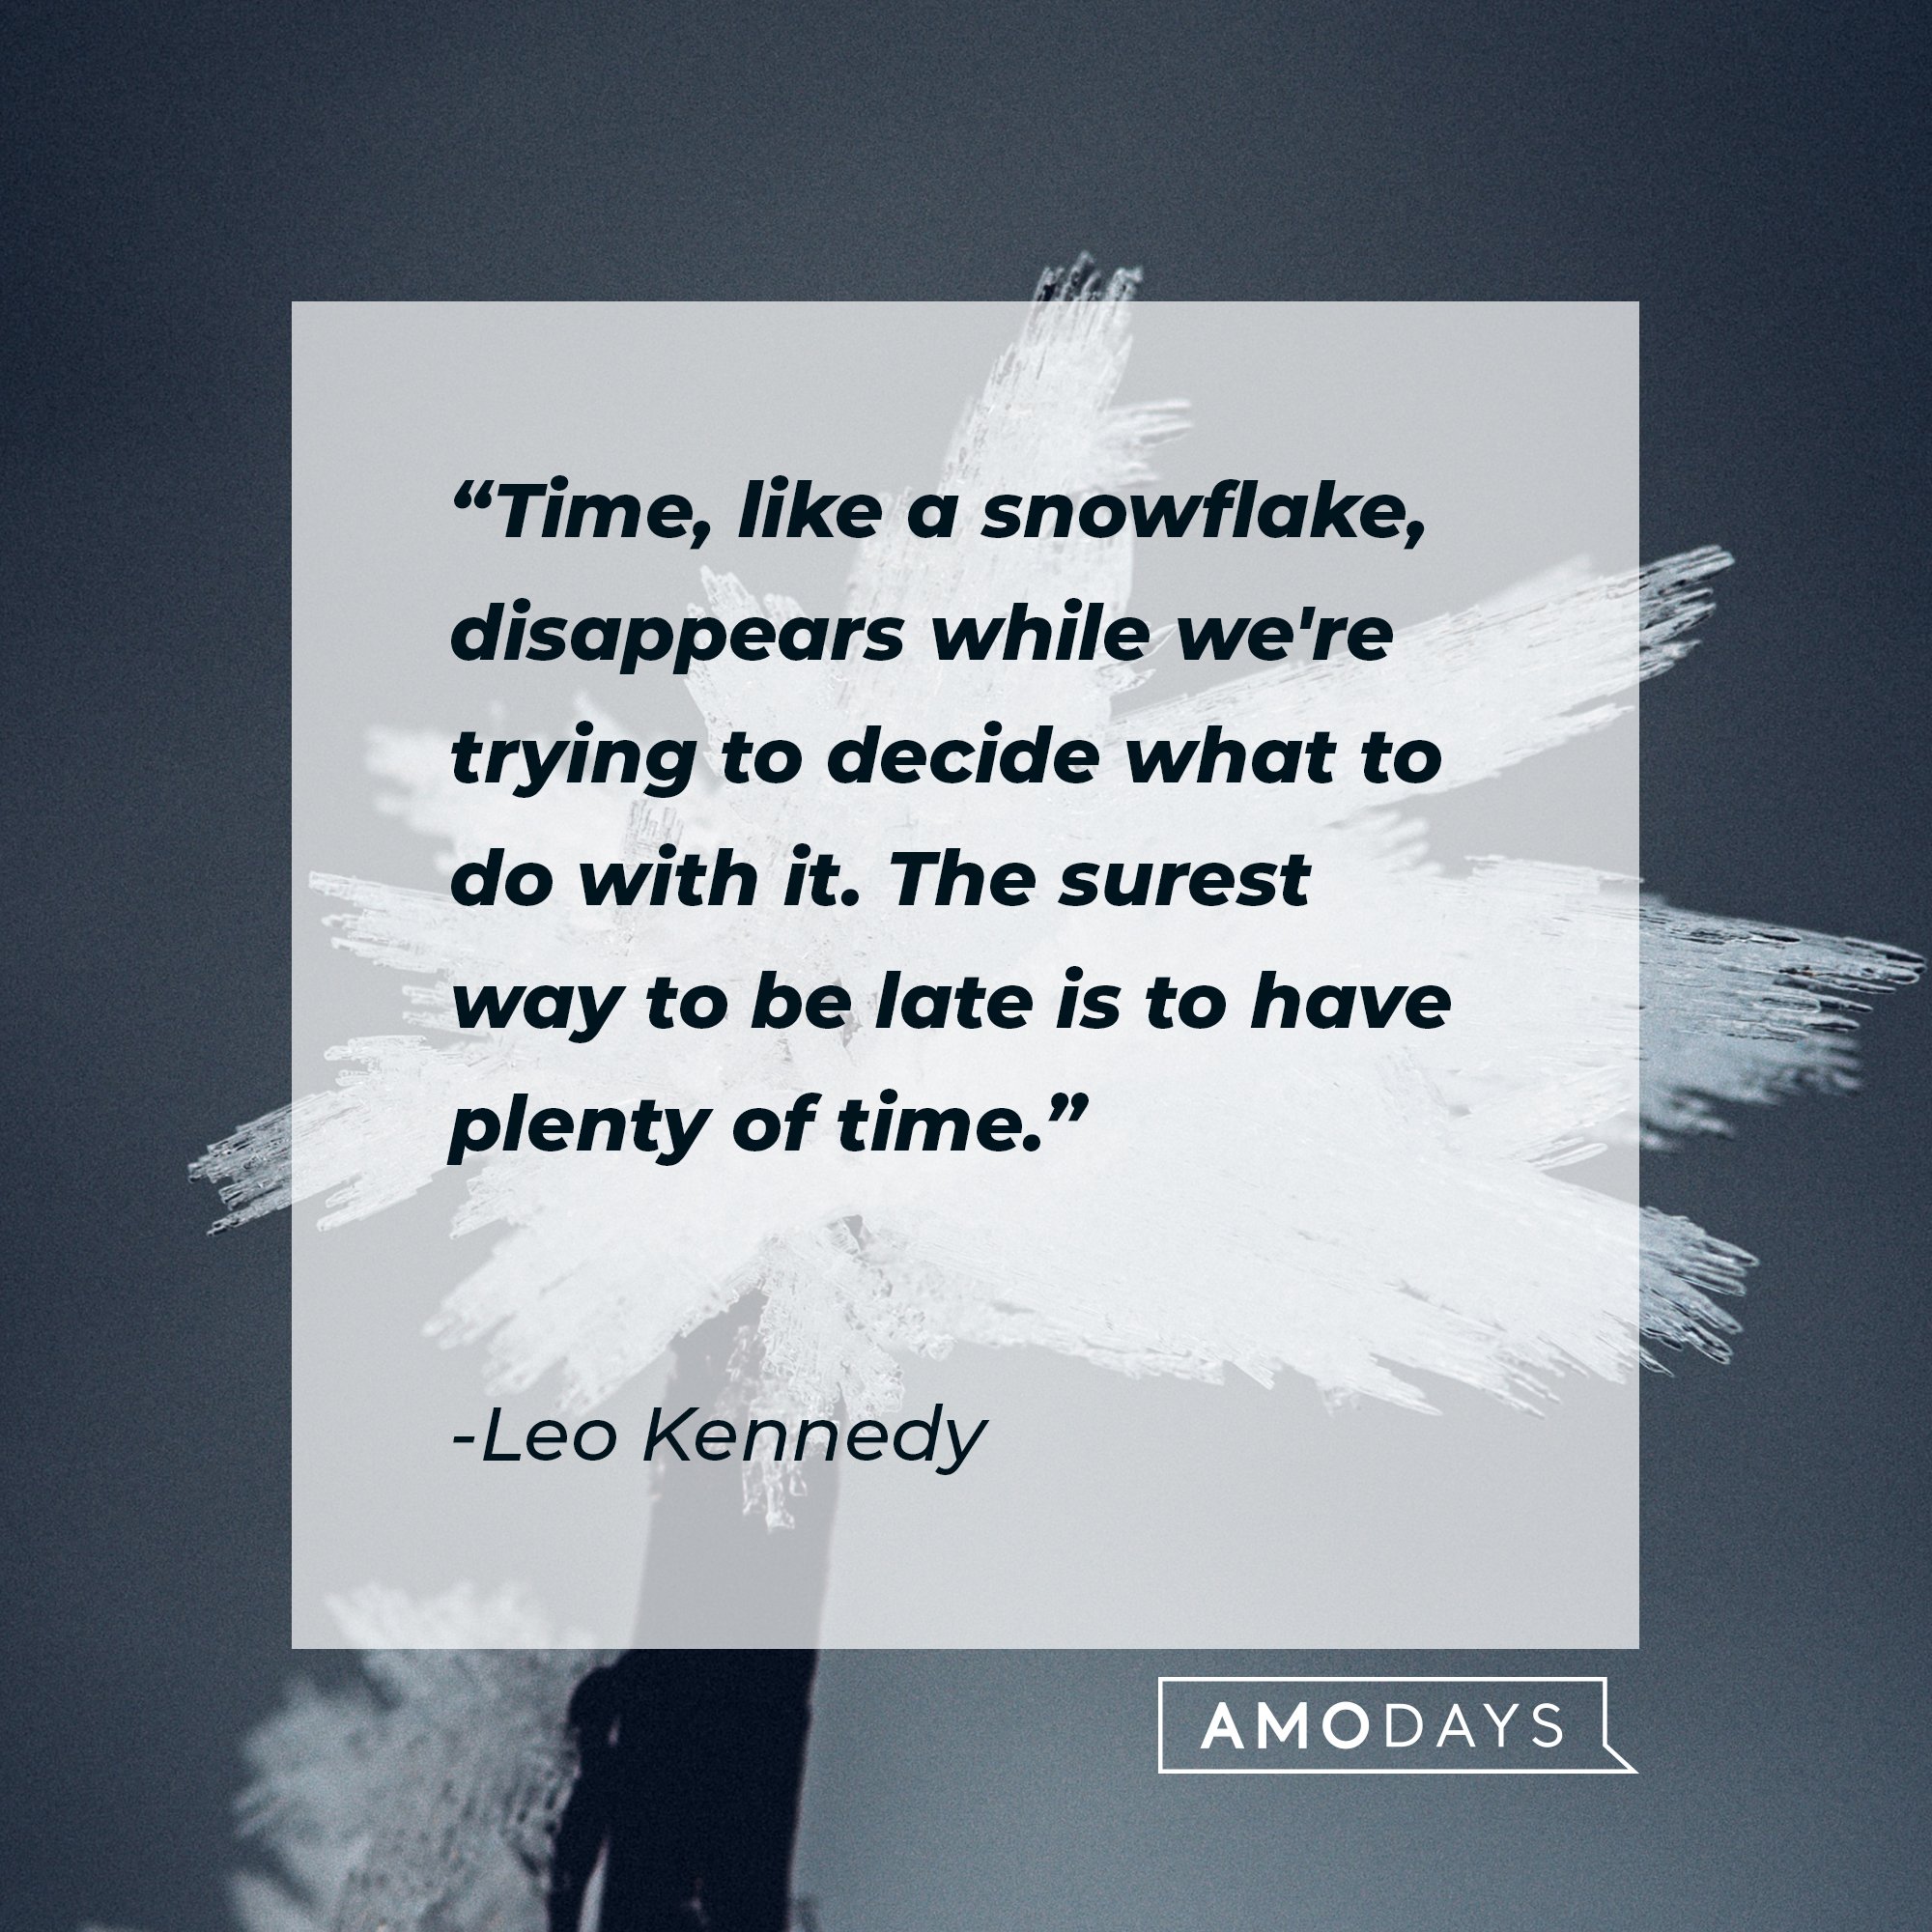 Leo Kennedy’s quote: "Time, like a snowflake, disappears while we're trying to decide what to do with it. The surest way to be late is to have plenty of time." | Image: AmoDays